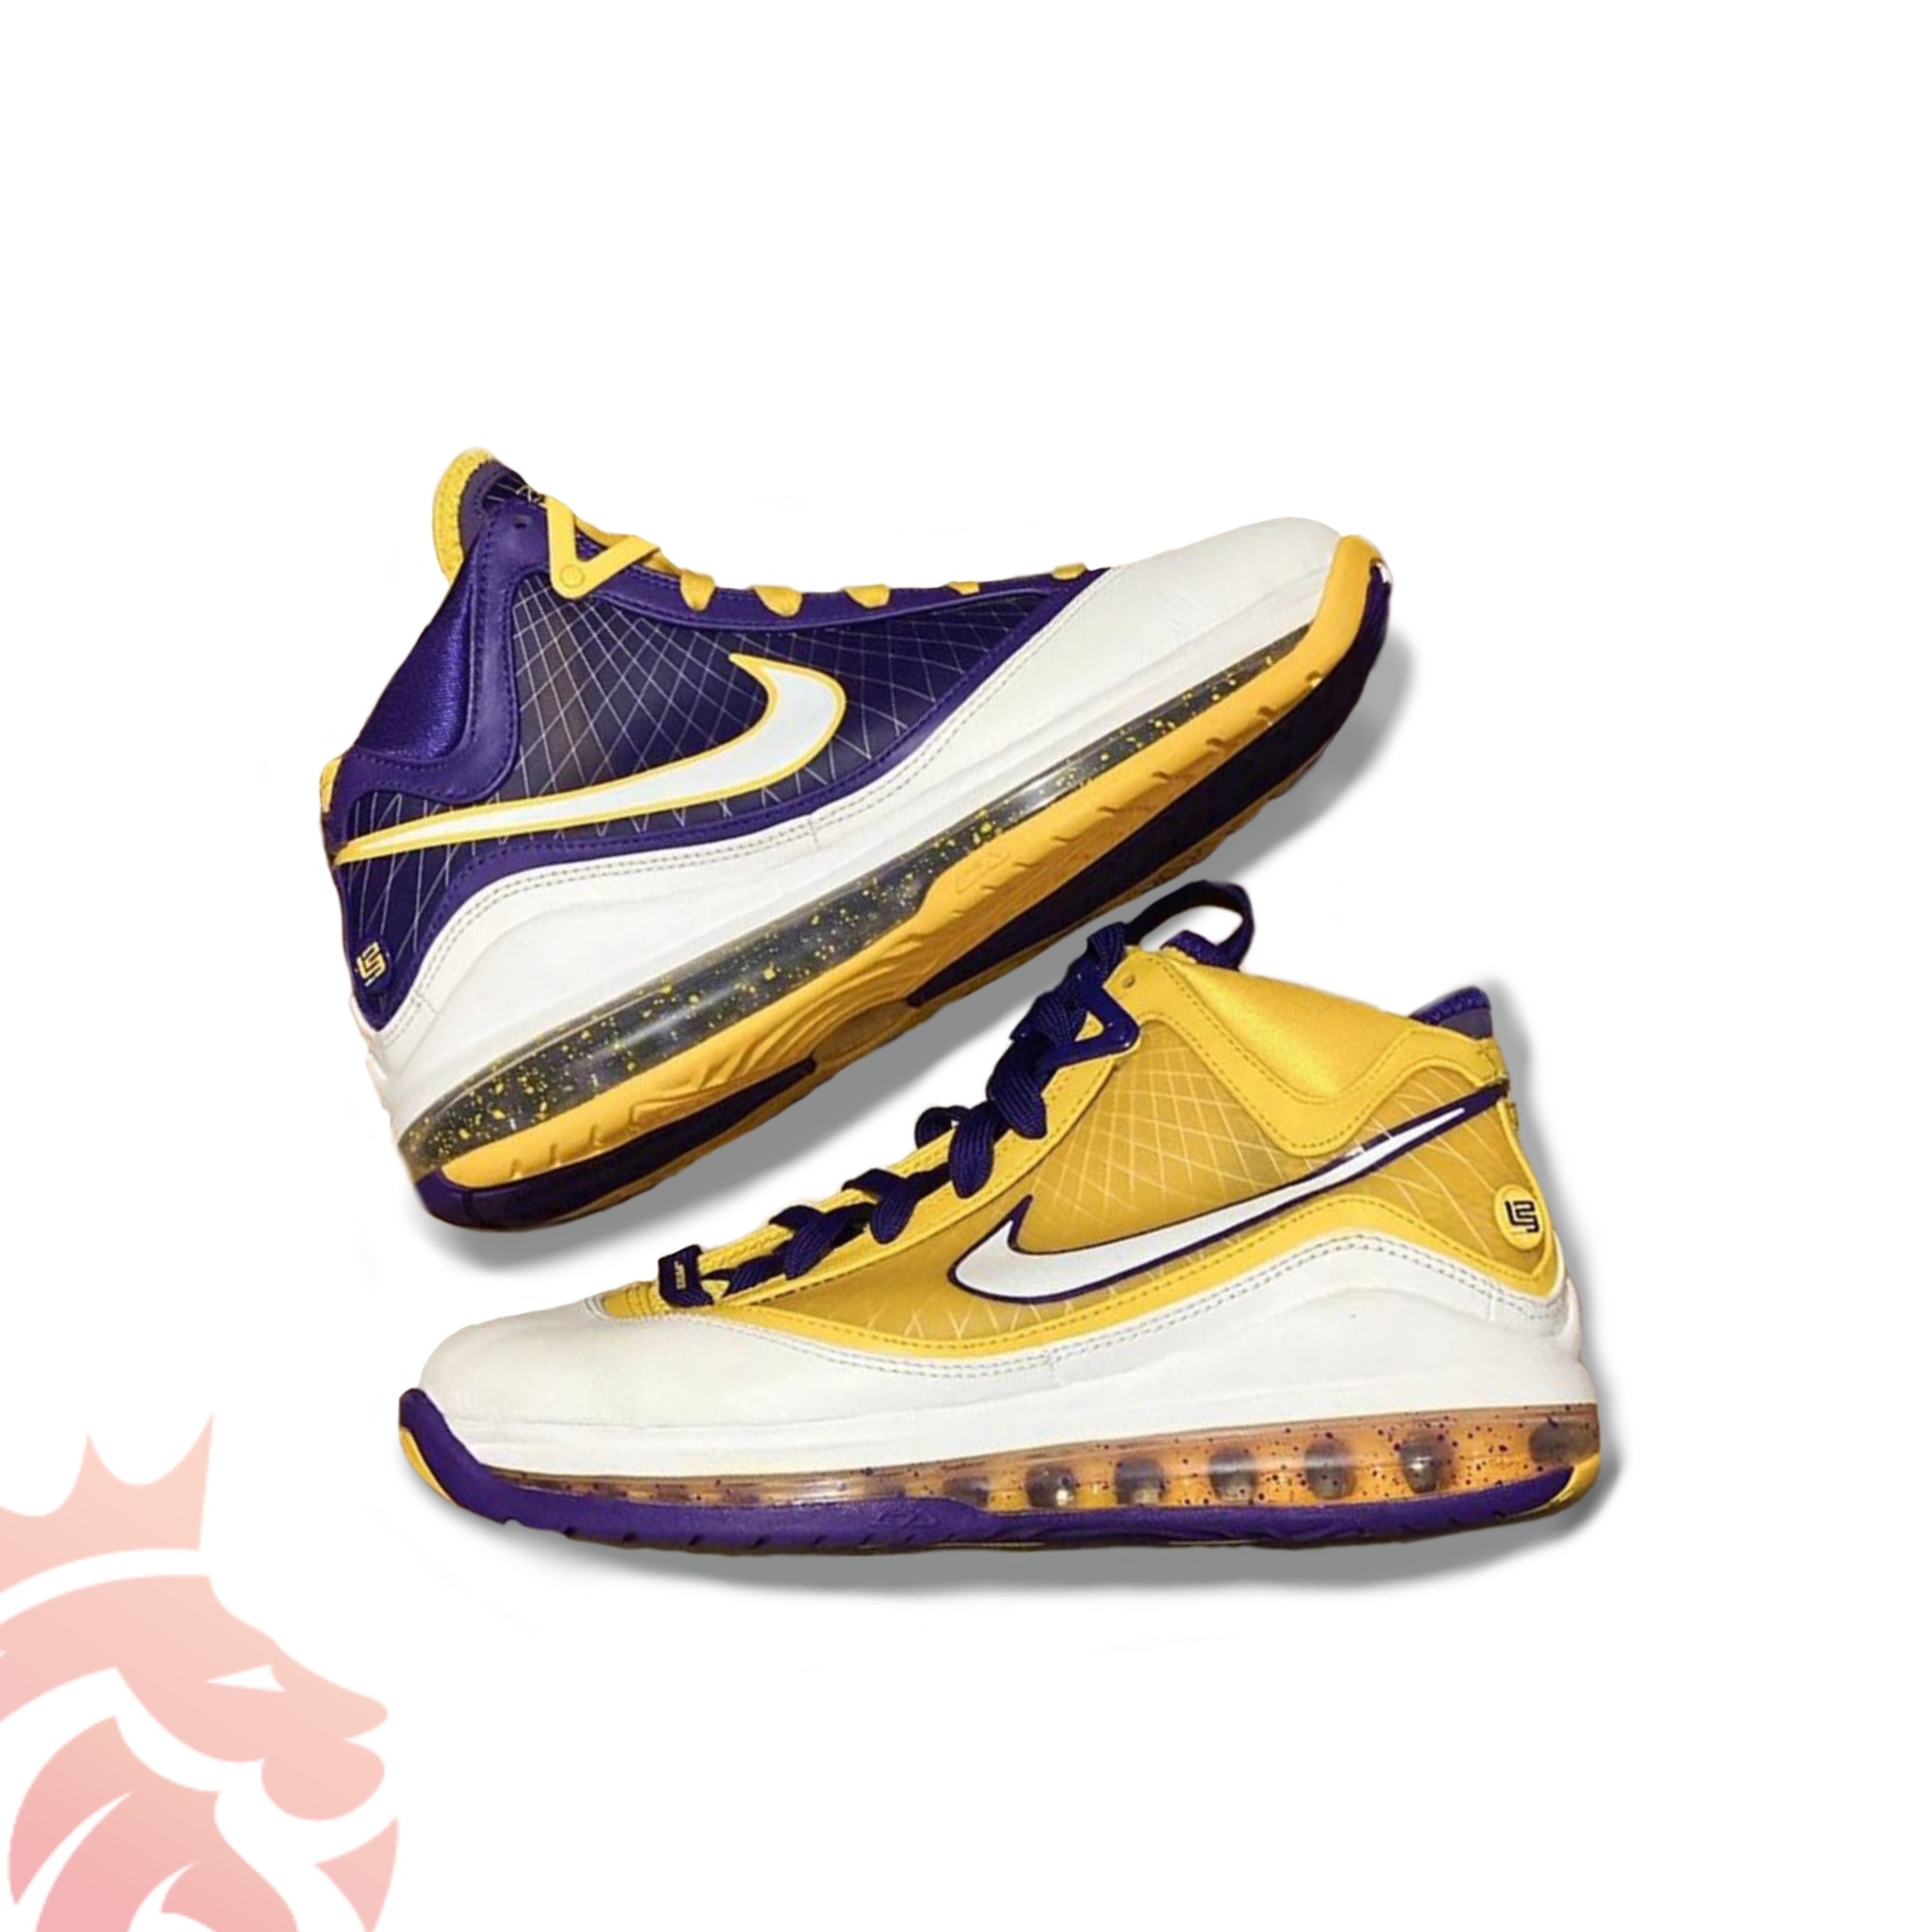 lebron 7 lakers colorway